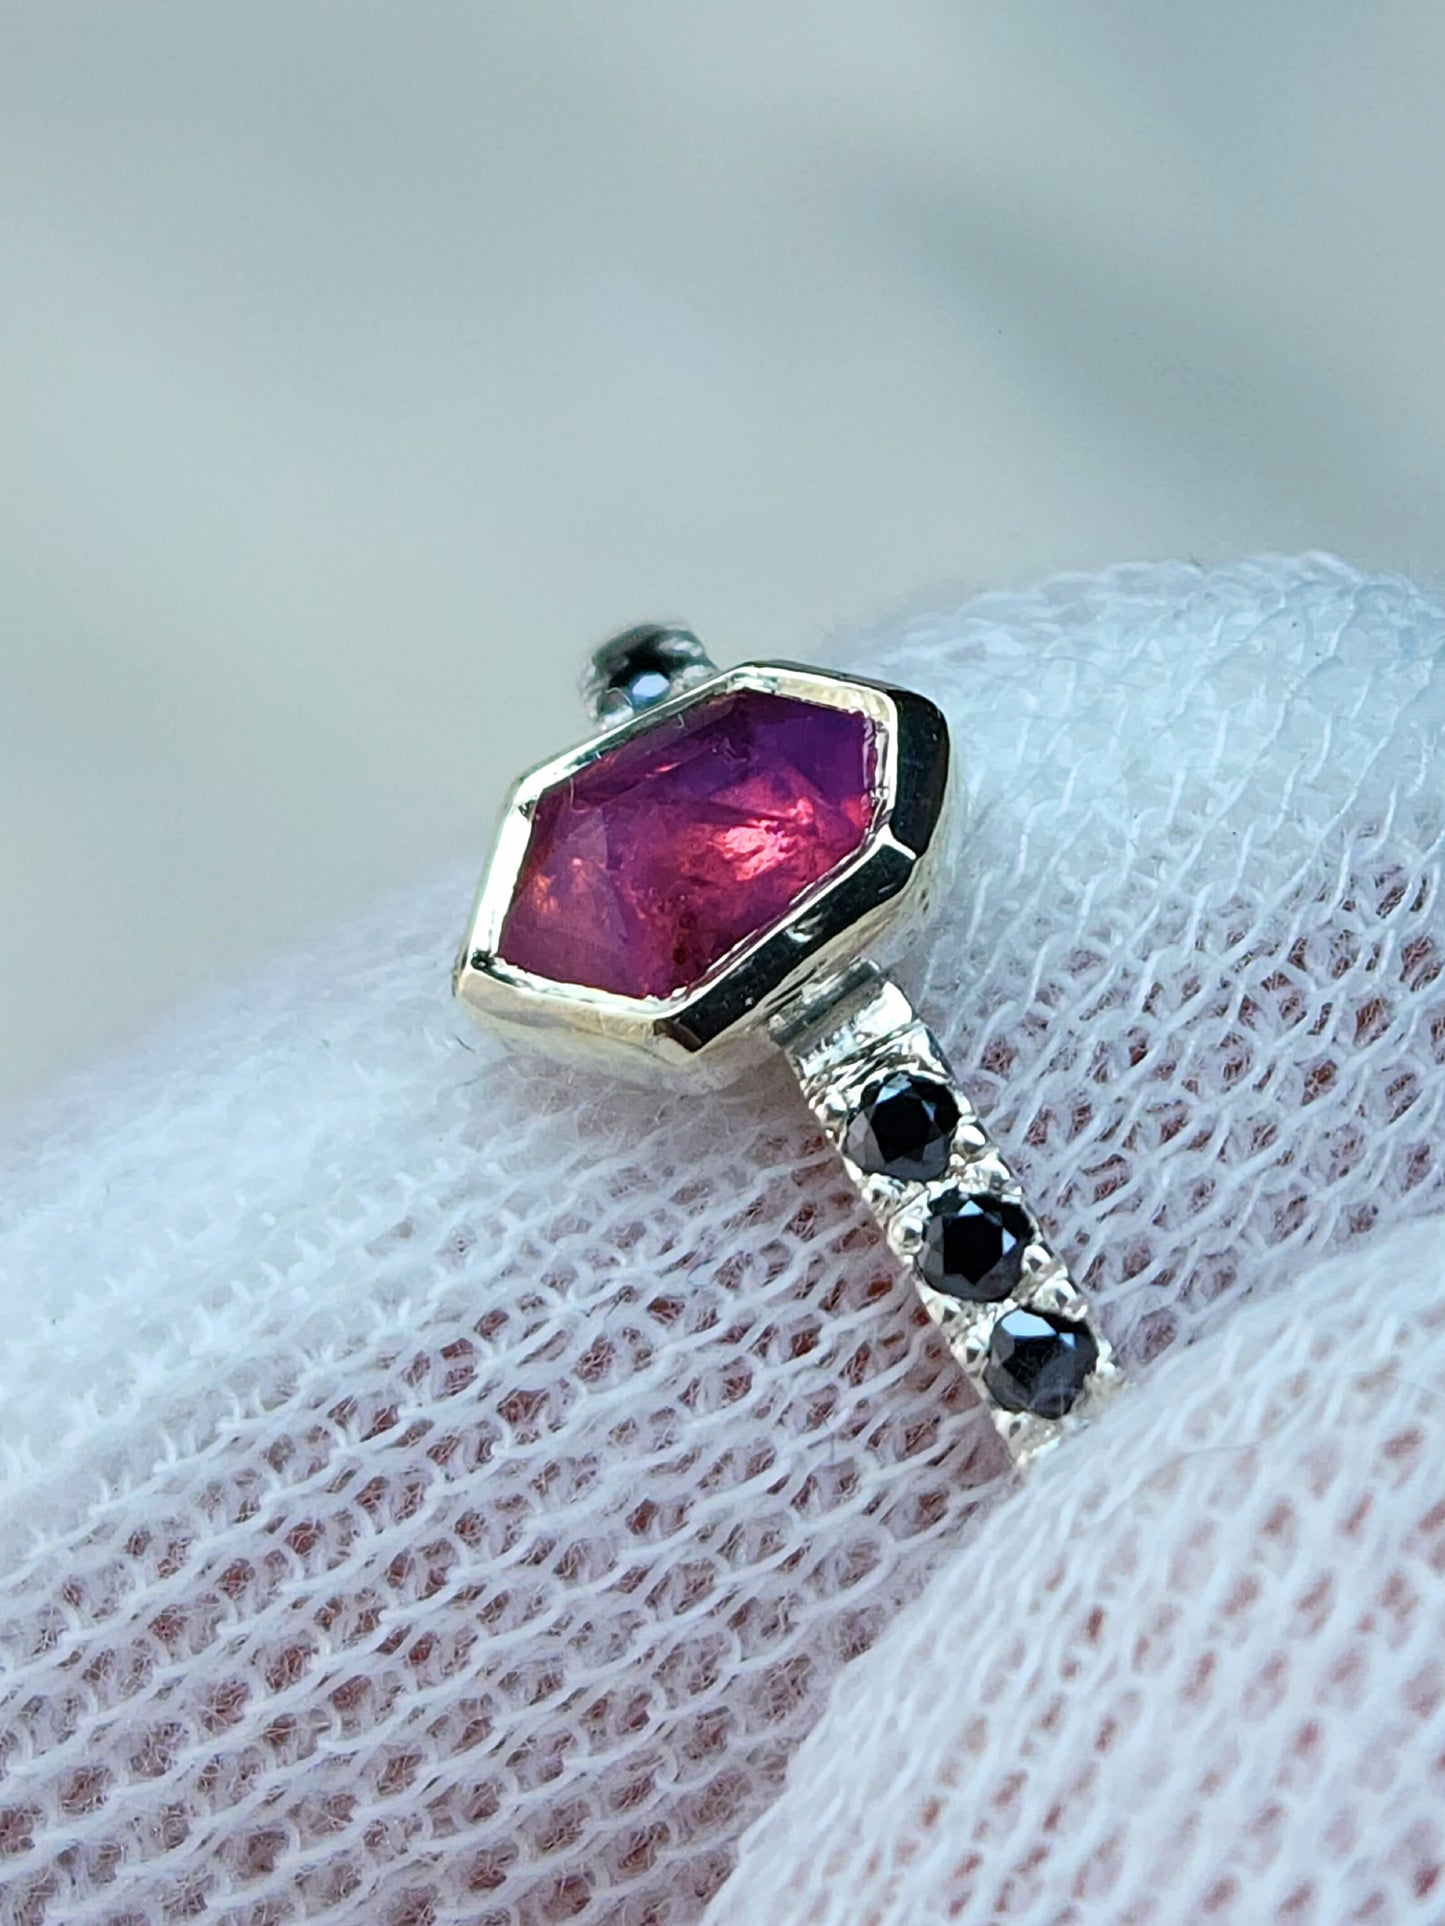 Opalescent pink sapphire shield winza sapphire sterling silver ring with 12-1.5 mm pave set black moissanites in a 10 karat yellow gold bezel